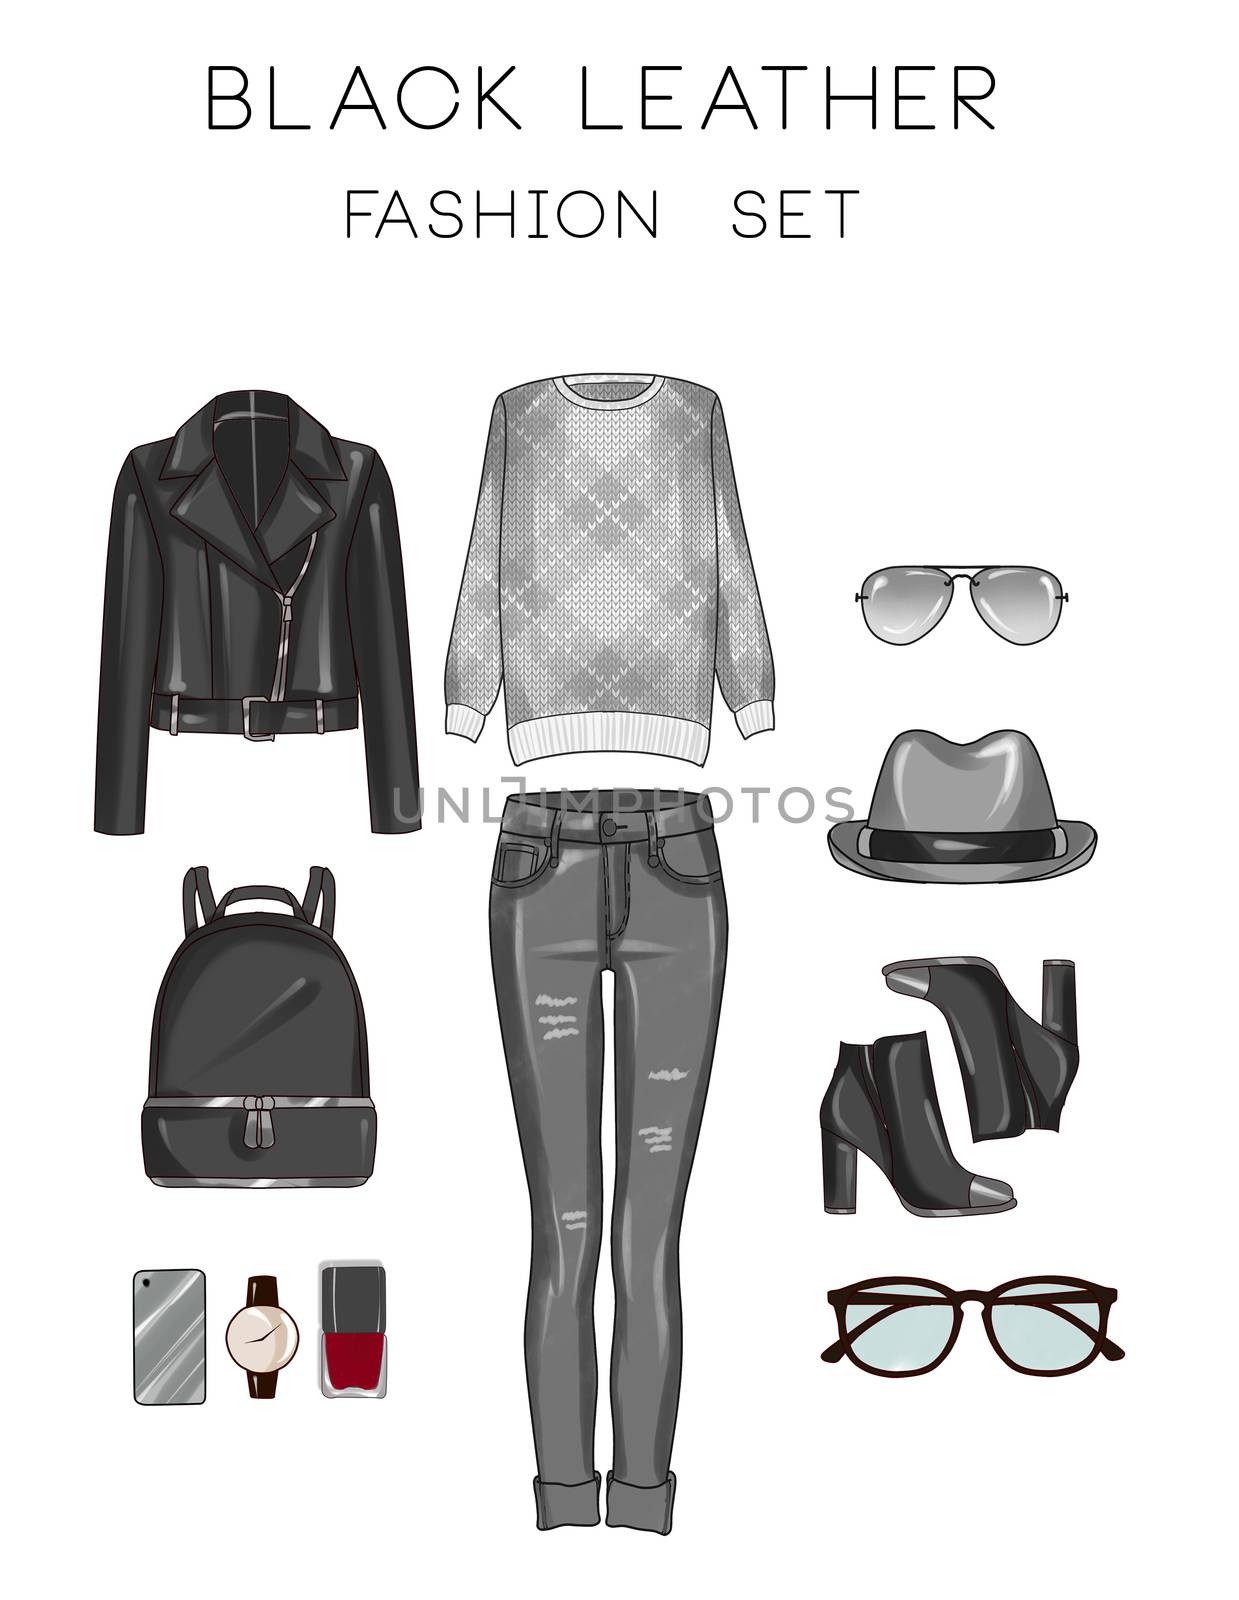 Fashion set of woman's clothes and accessories - Black leather biker jacket, jeans, sweater, sunglasses, boots, bag, make up, hat